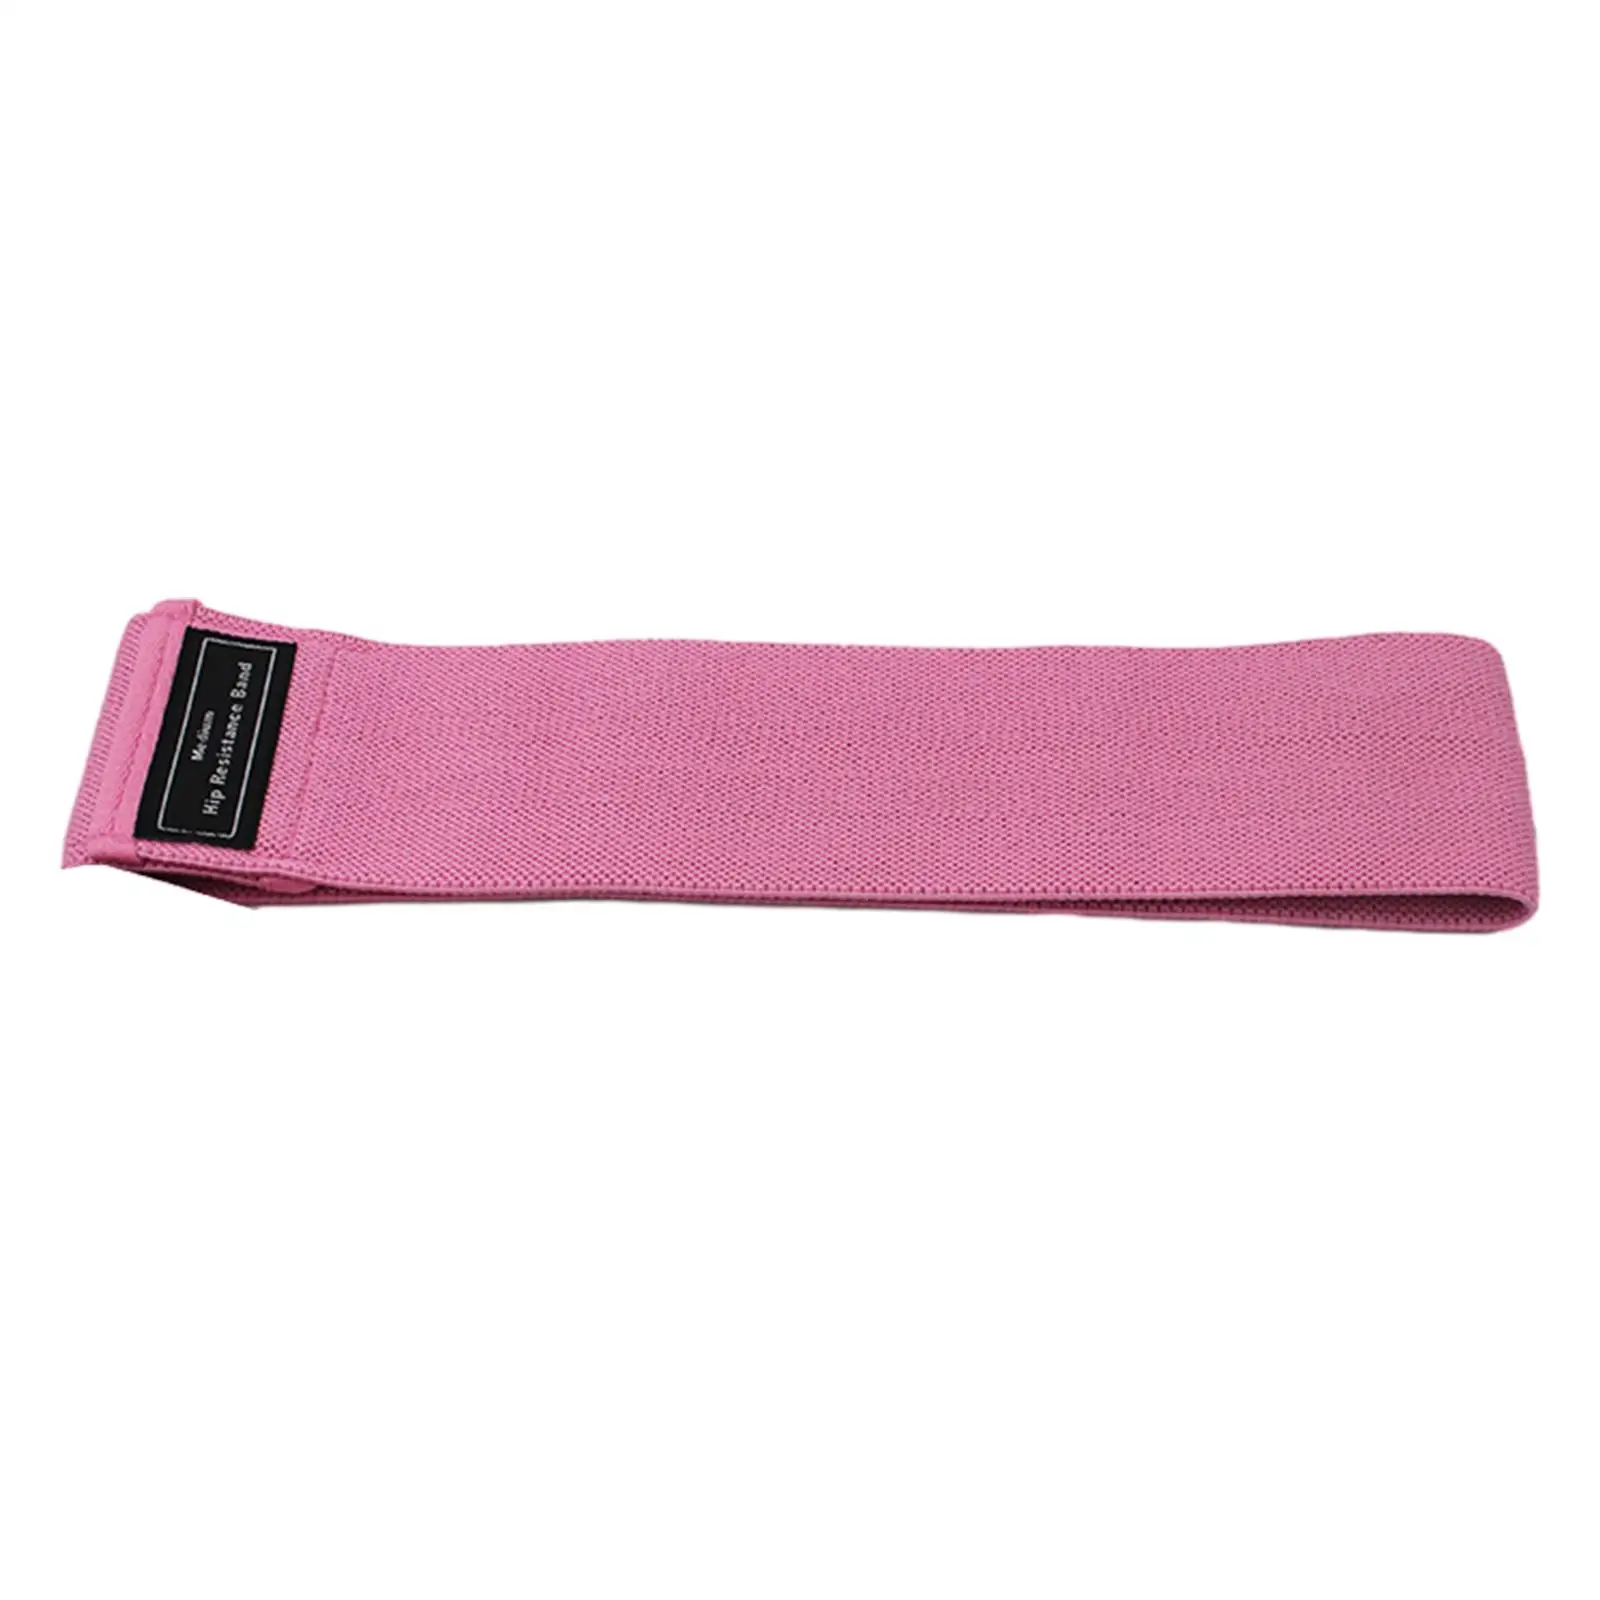 resistance bands, non-slip training bands for women and men,